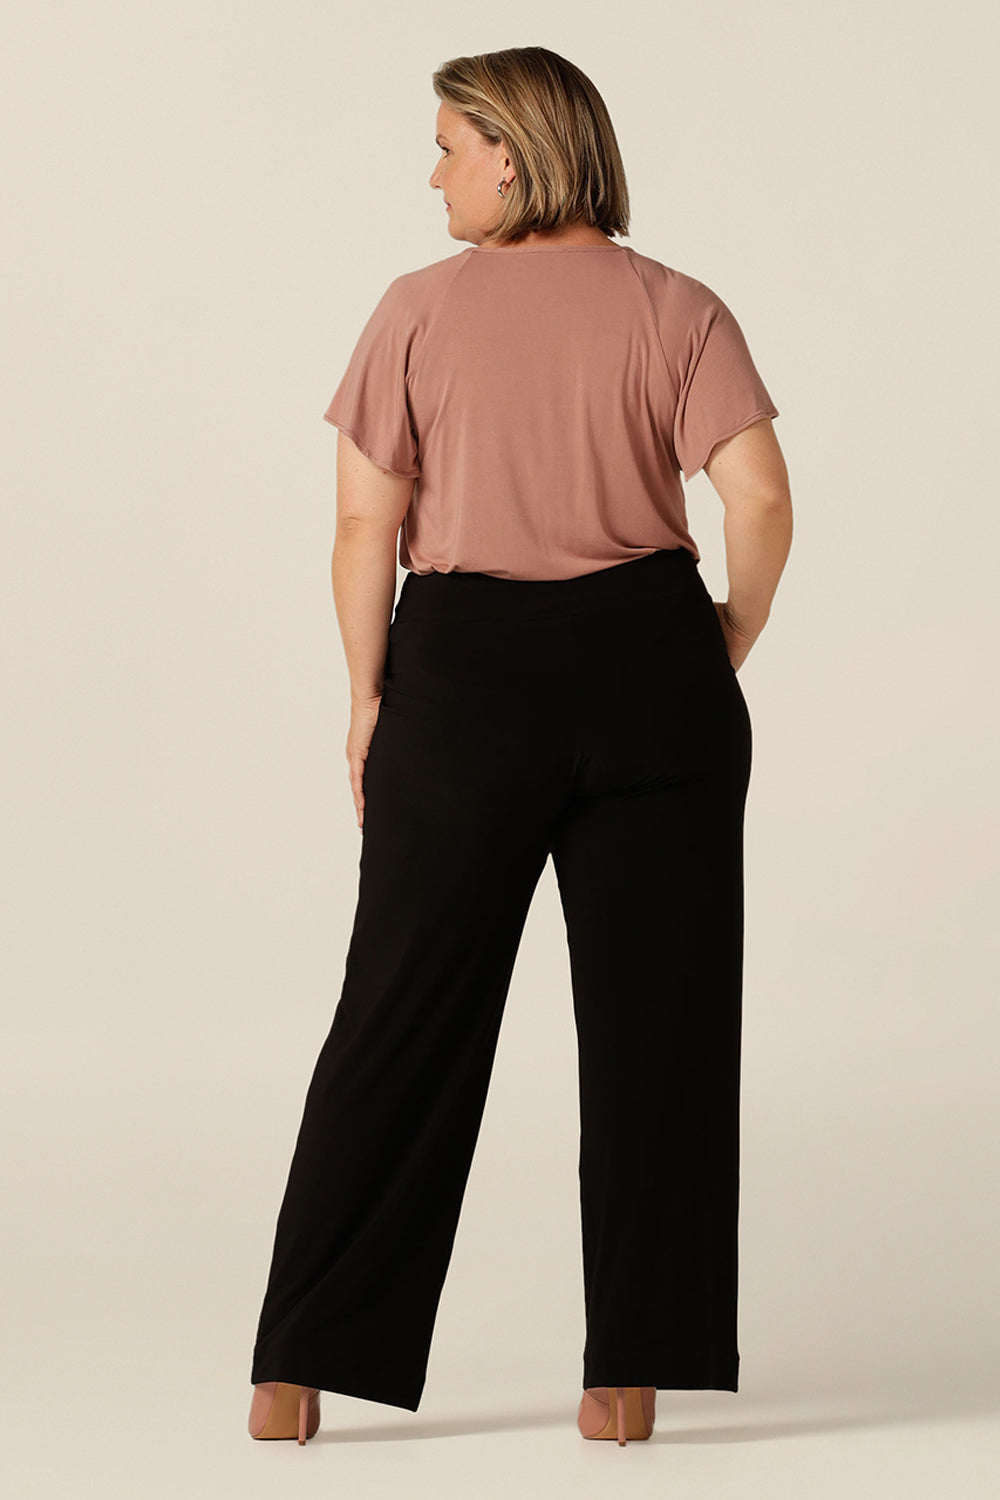 comfortable black wide leg pant with pockets for work and weekend